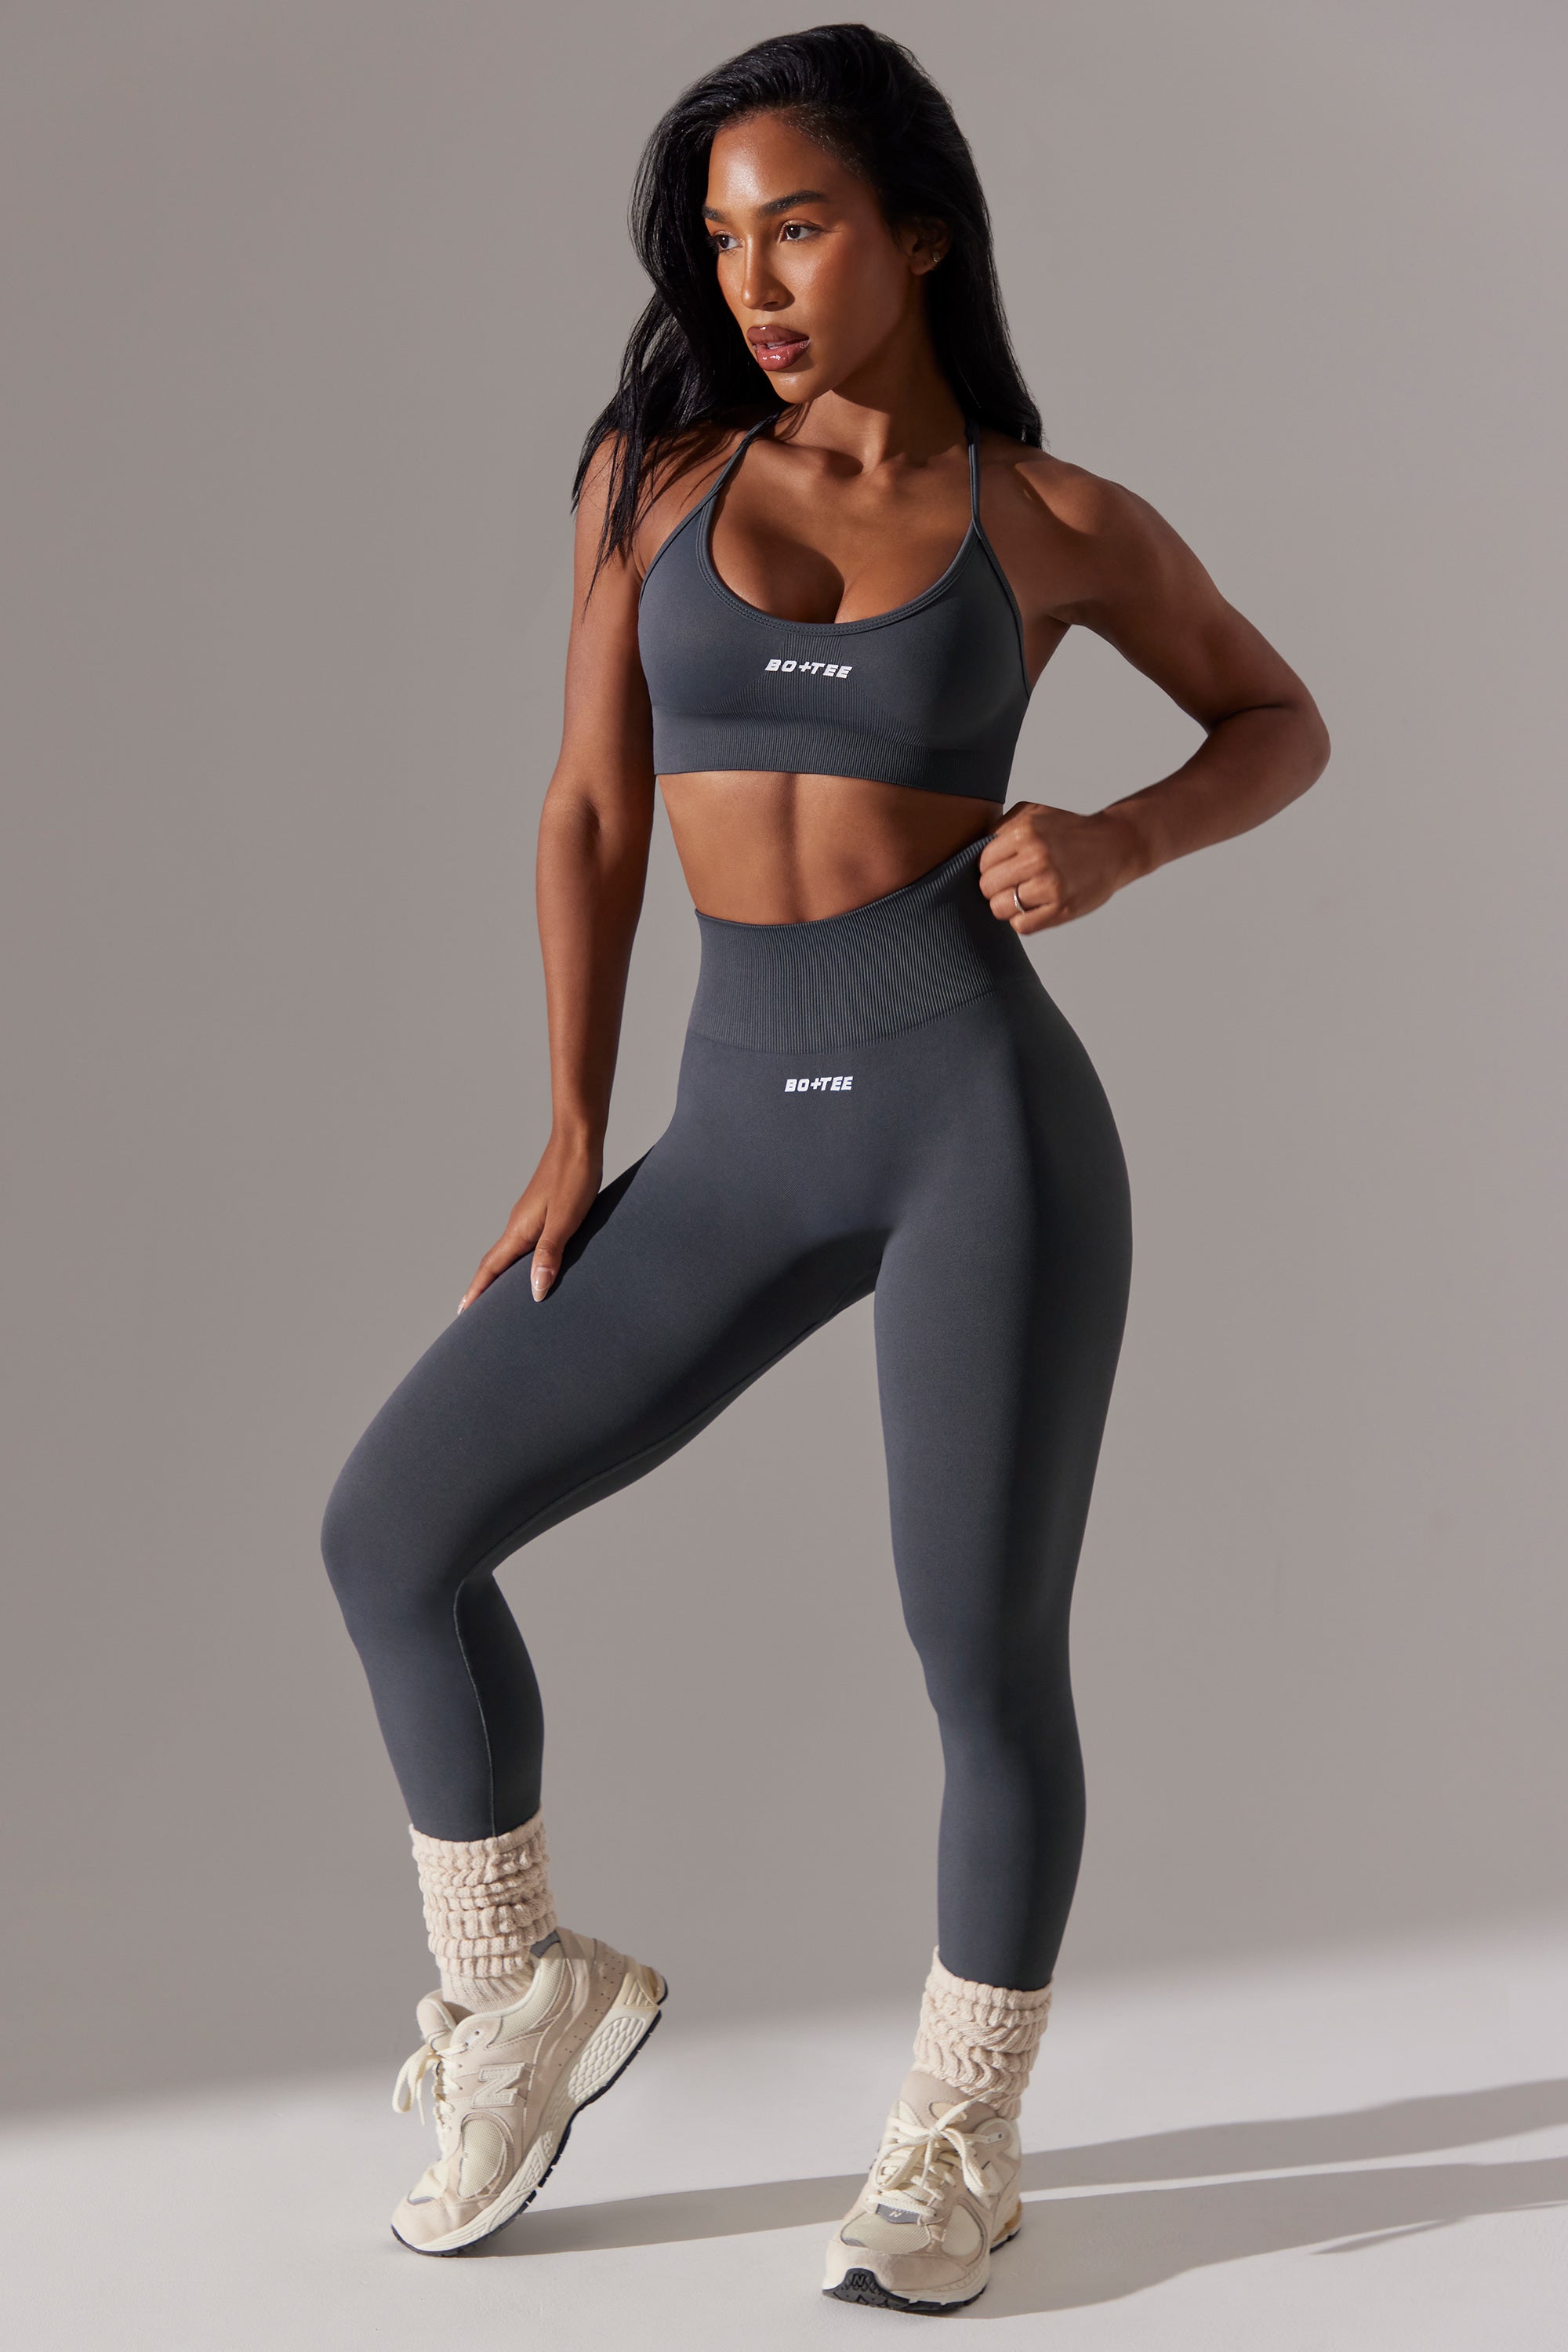 Bo+Tee Review: The activewear brand that fits perfectly in all the